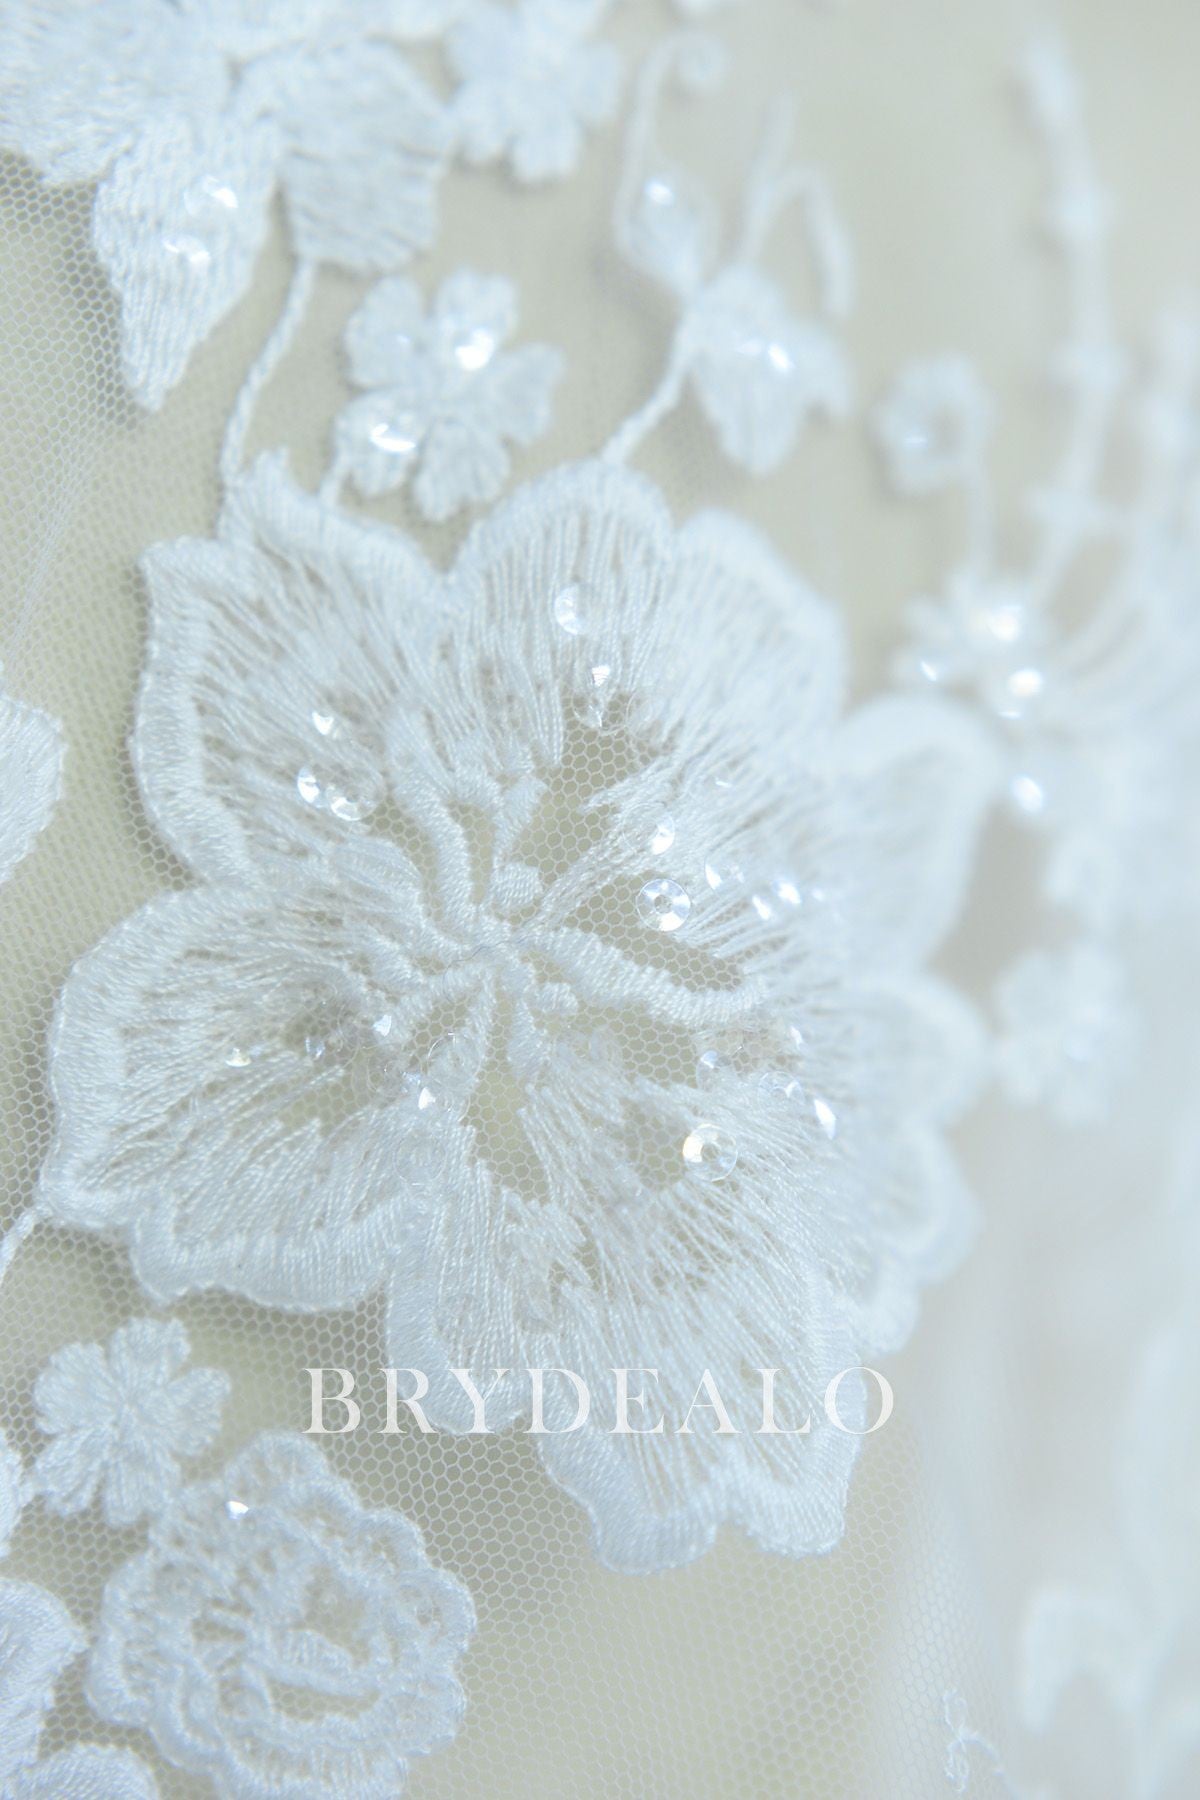 Flower Bridal Lace Fabric